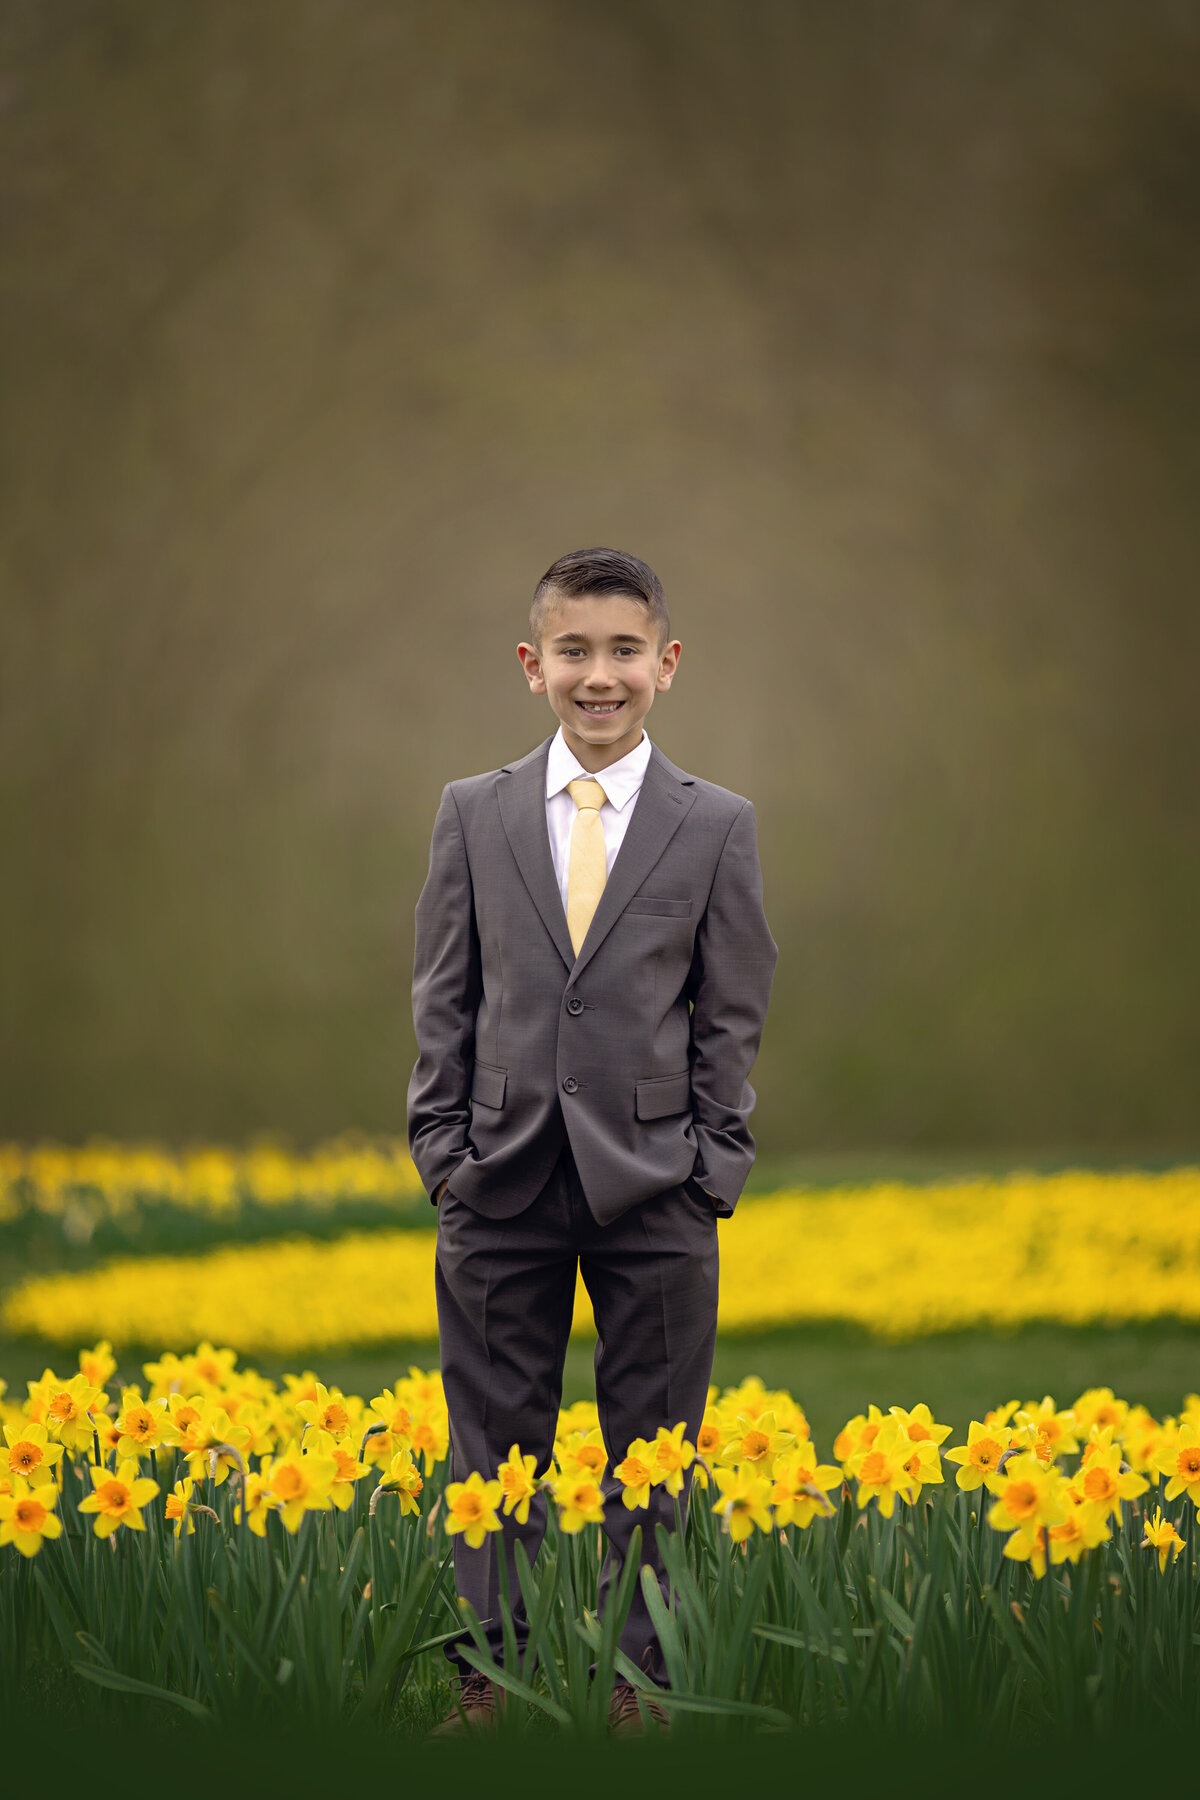 A young boy in a grey suit stands among some yellow daffodils in a grey suit and yellow tie with hands in his pockets